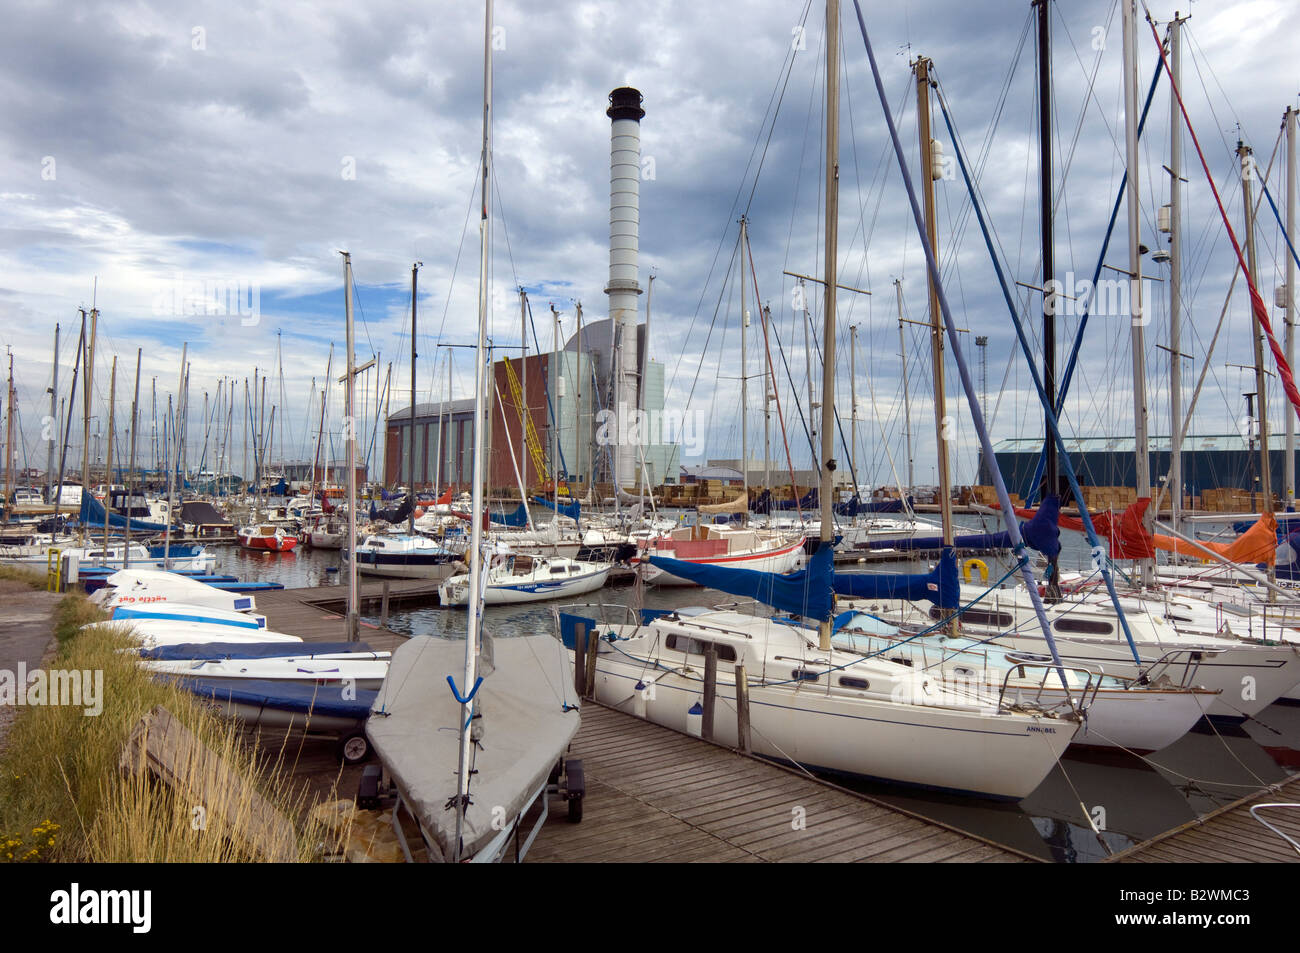 Shoreham Power Station seen through a marina of small yachts in Shoreham Harbour West Sussex Stock Photo